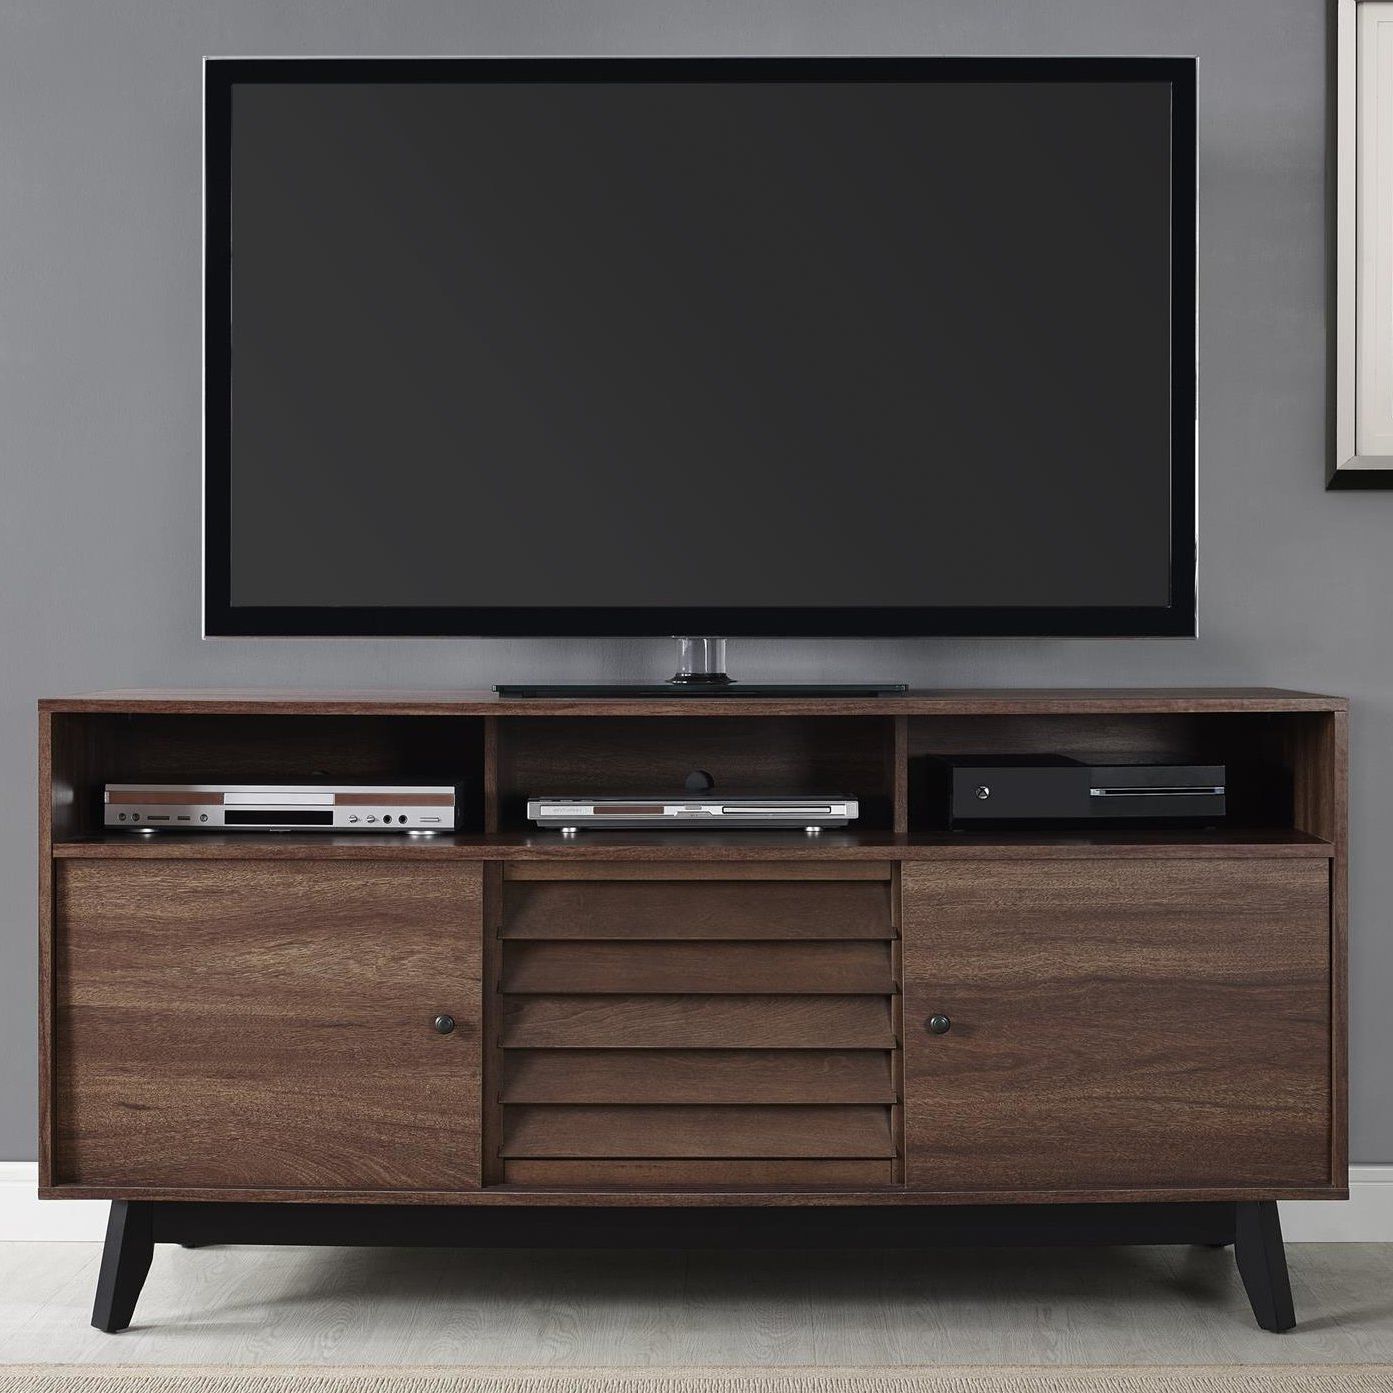 Trent Austin Design Dover Tv Stand For Tvs Up To 60" & Reviews | Wayfair Inside Caden 63 Inch Tv Stands (View 2 of 20)